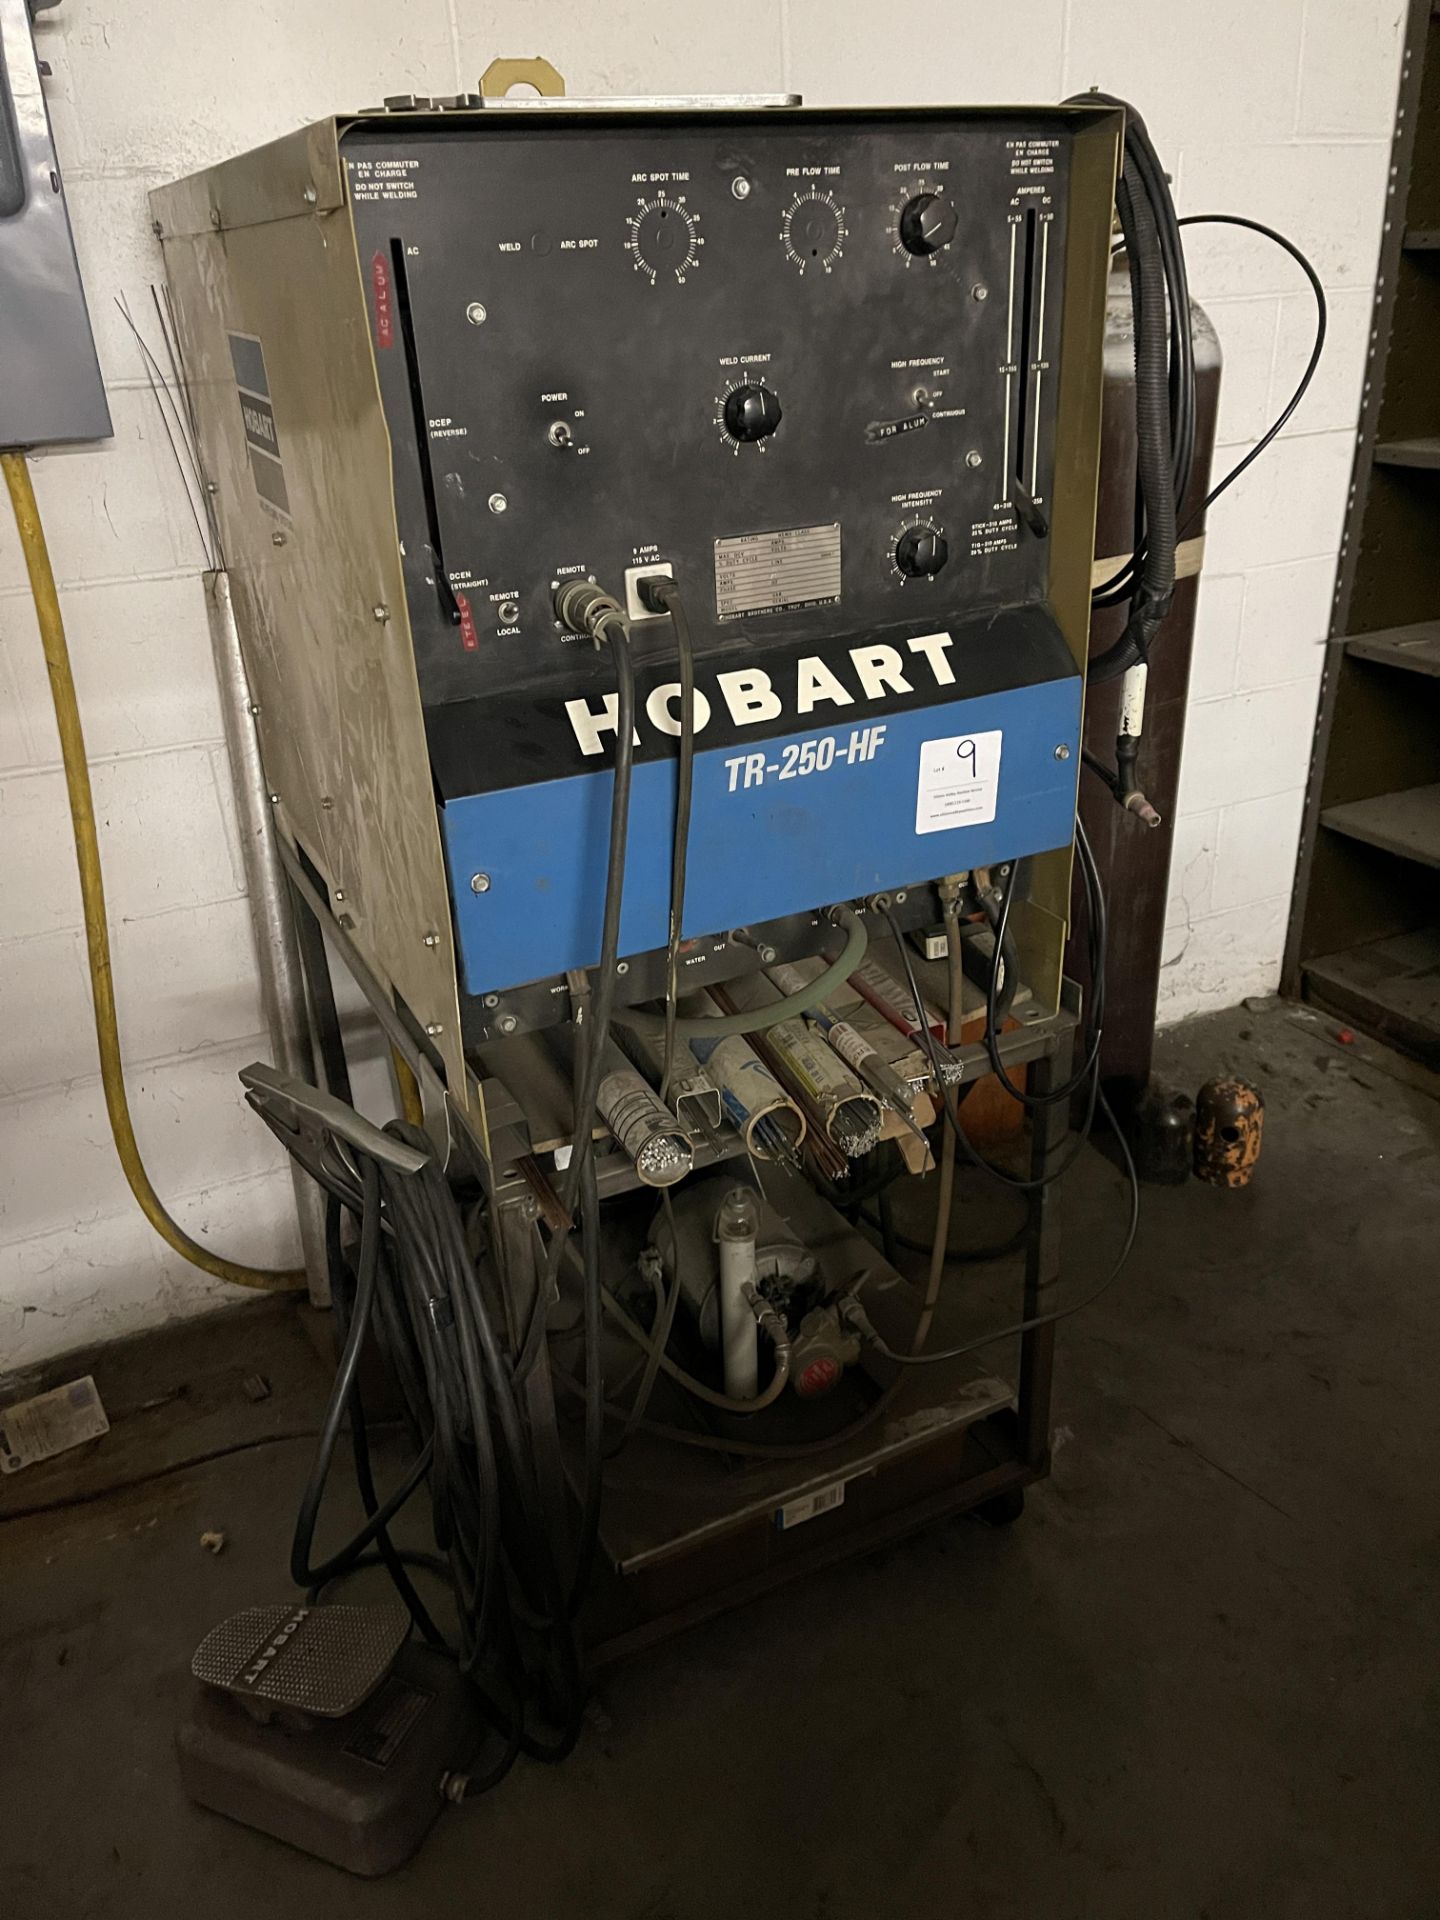 Hobart arc welder model TR-250-HF with two tanks